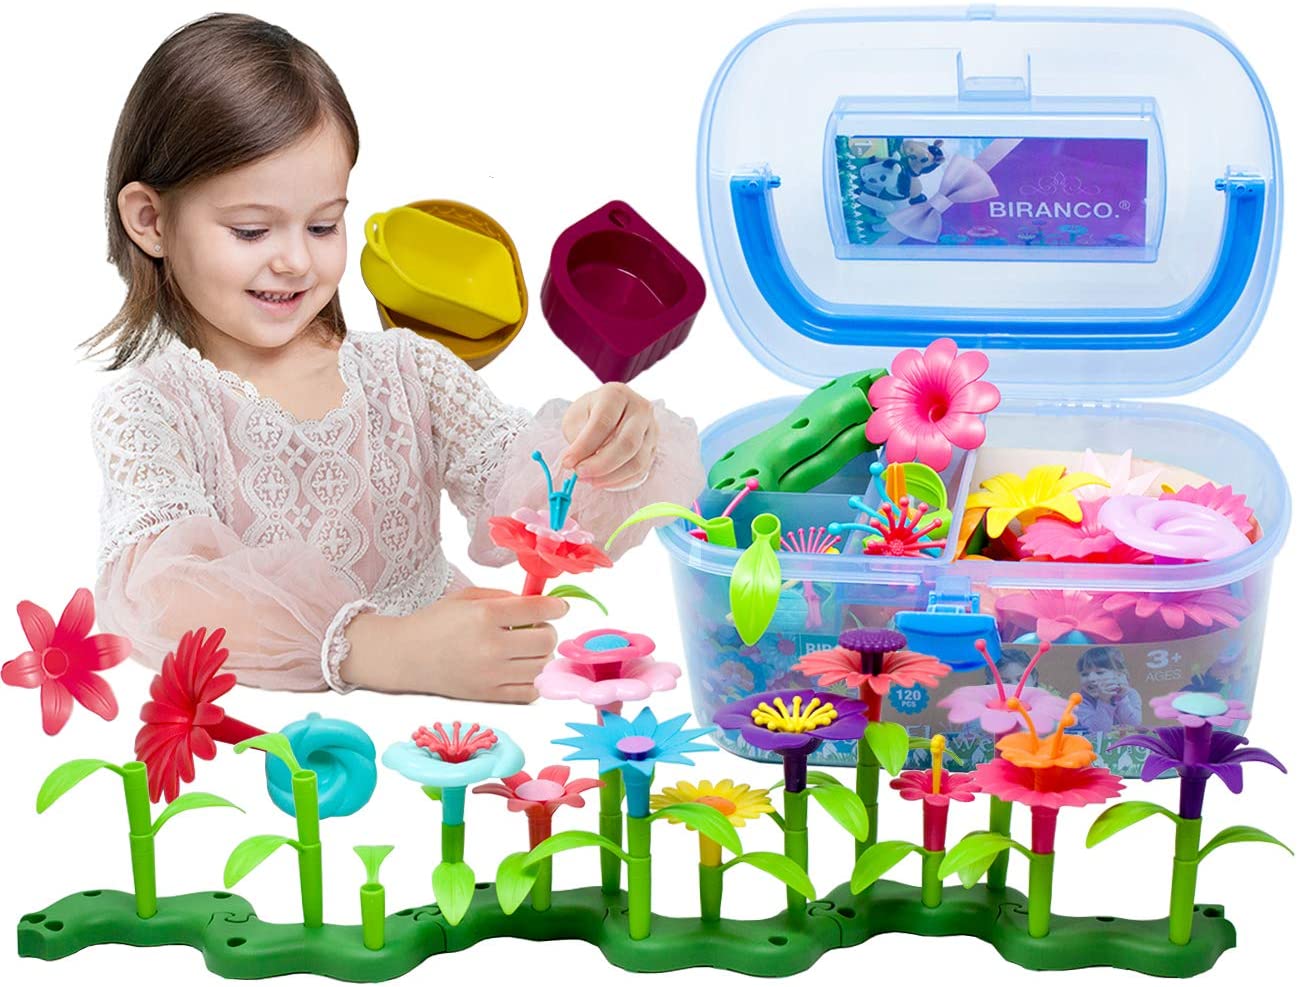 10 Toys That Can Nurture Your Child's Imagination And Creativity